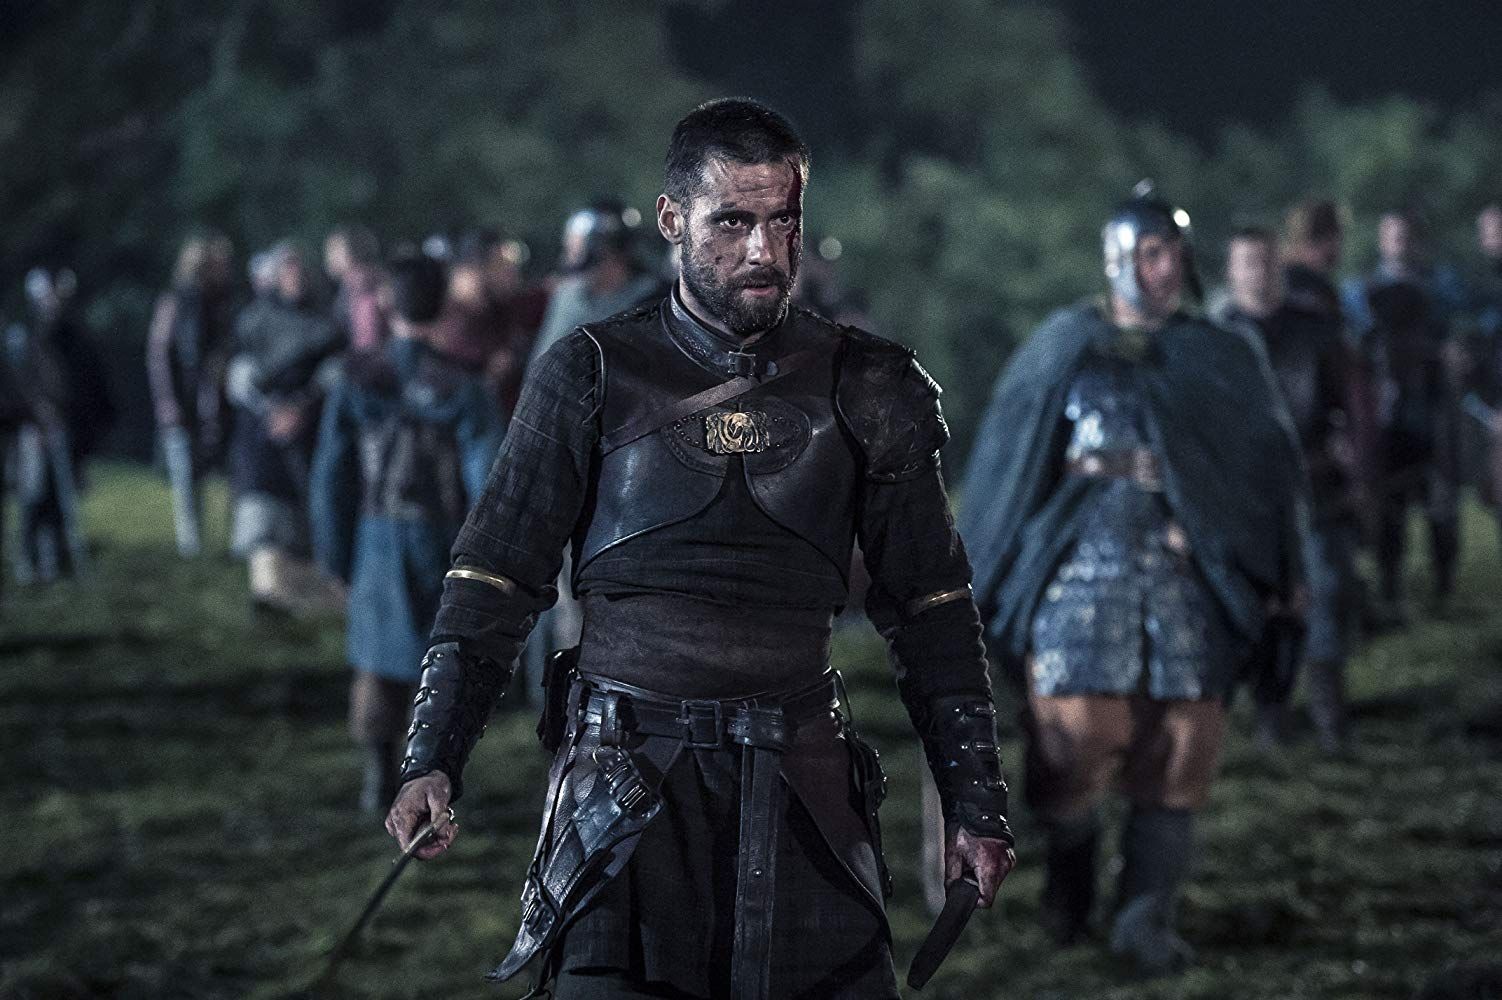 10 Most Vicious Fighters On The Last Kingdom Ranked